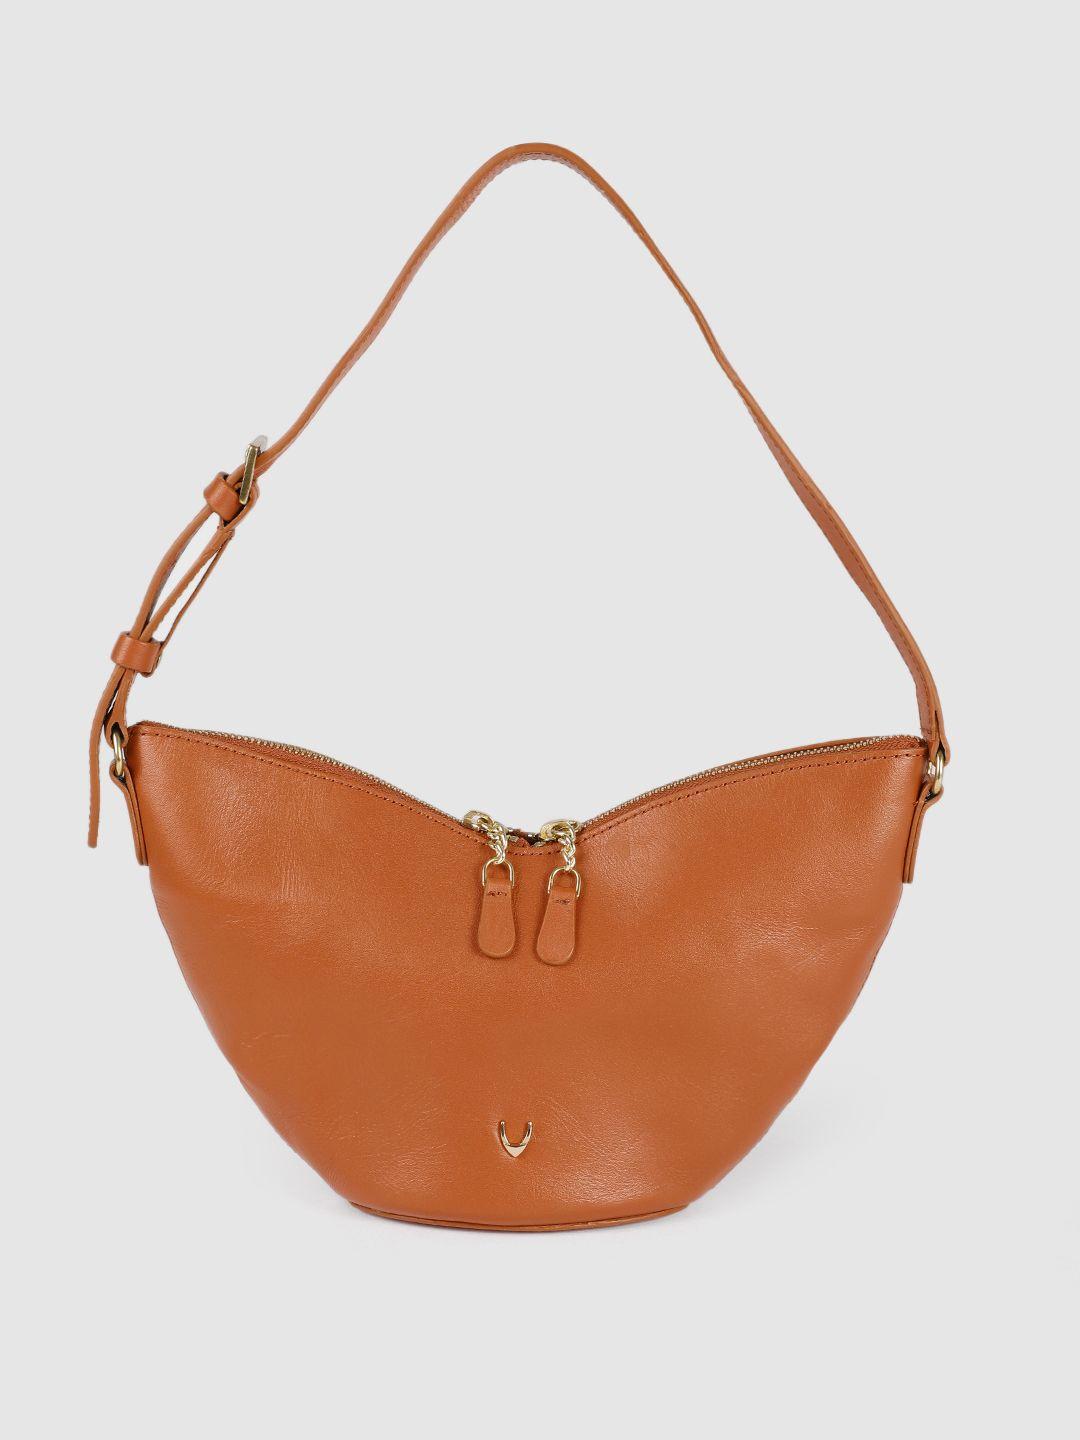 hidesign brown leather structured hobo bag